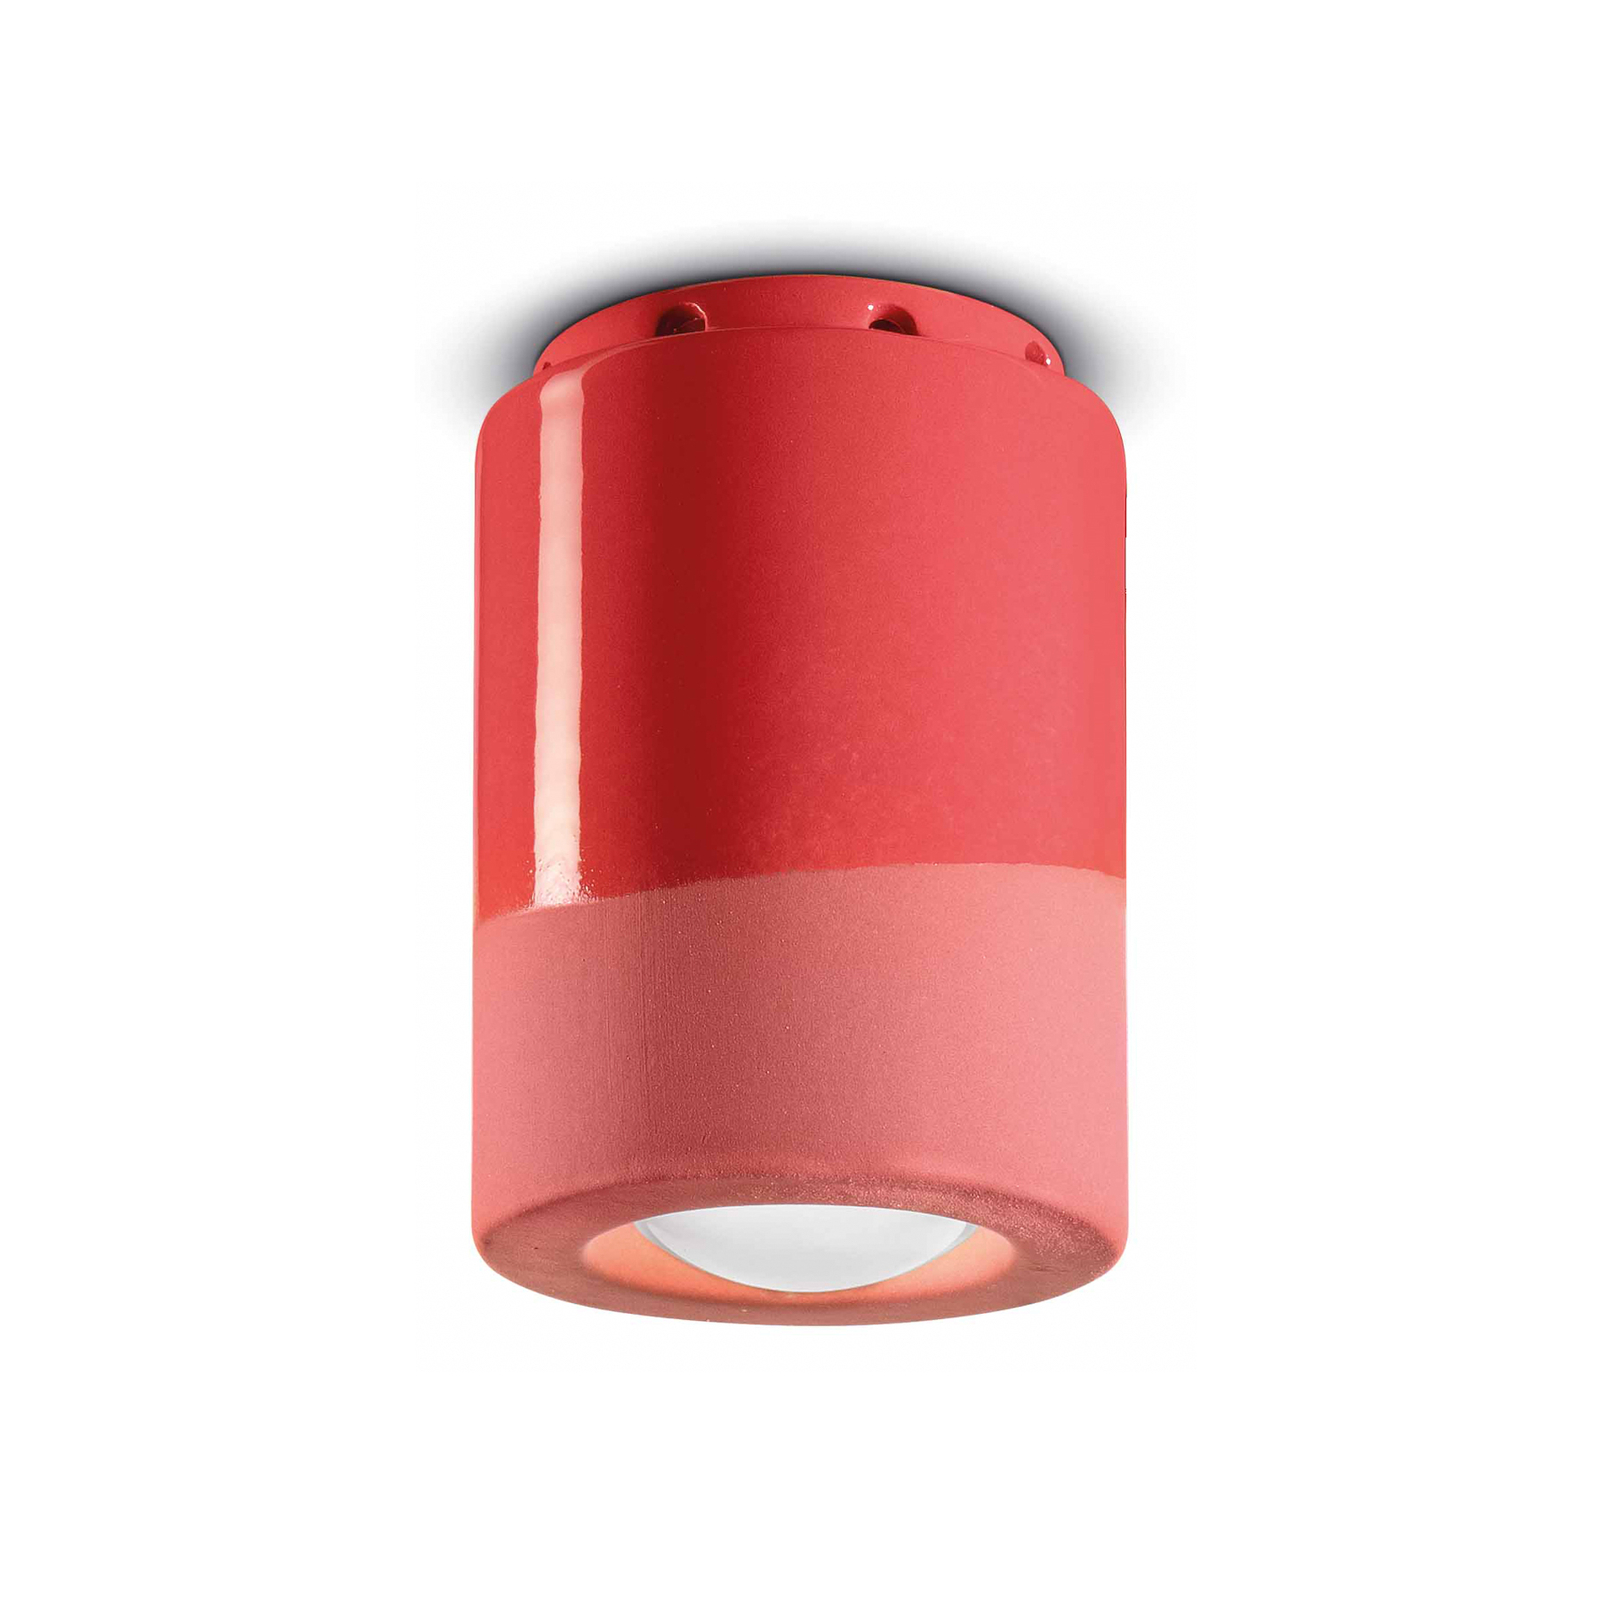 PI ceiling lamp, cylindrical, Ø 8.5 cm, red